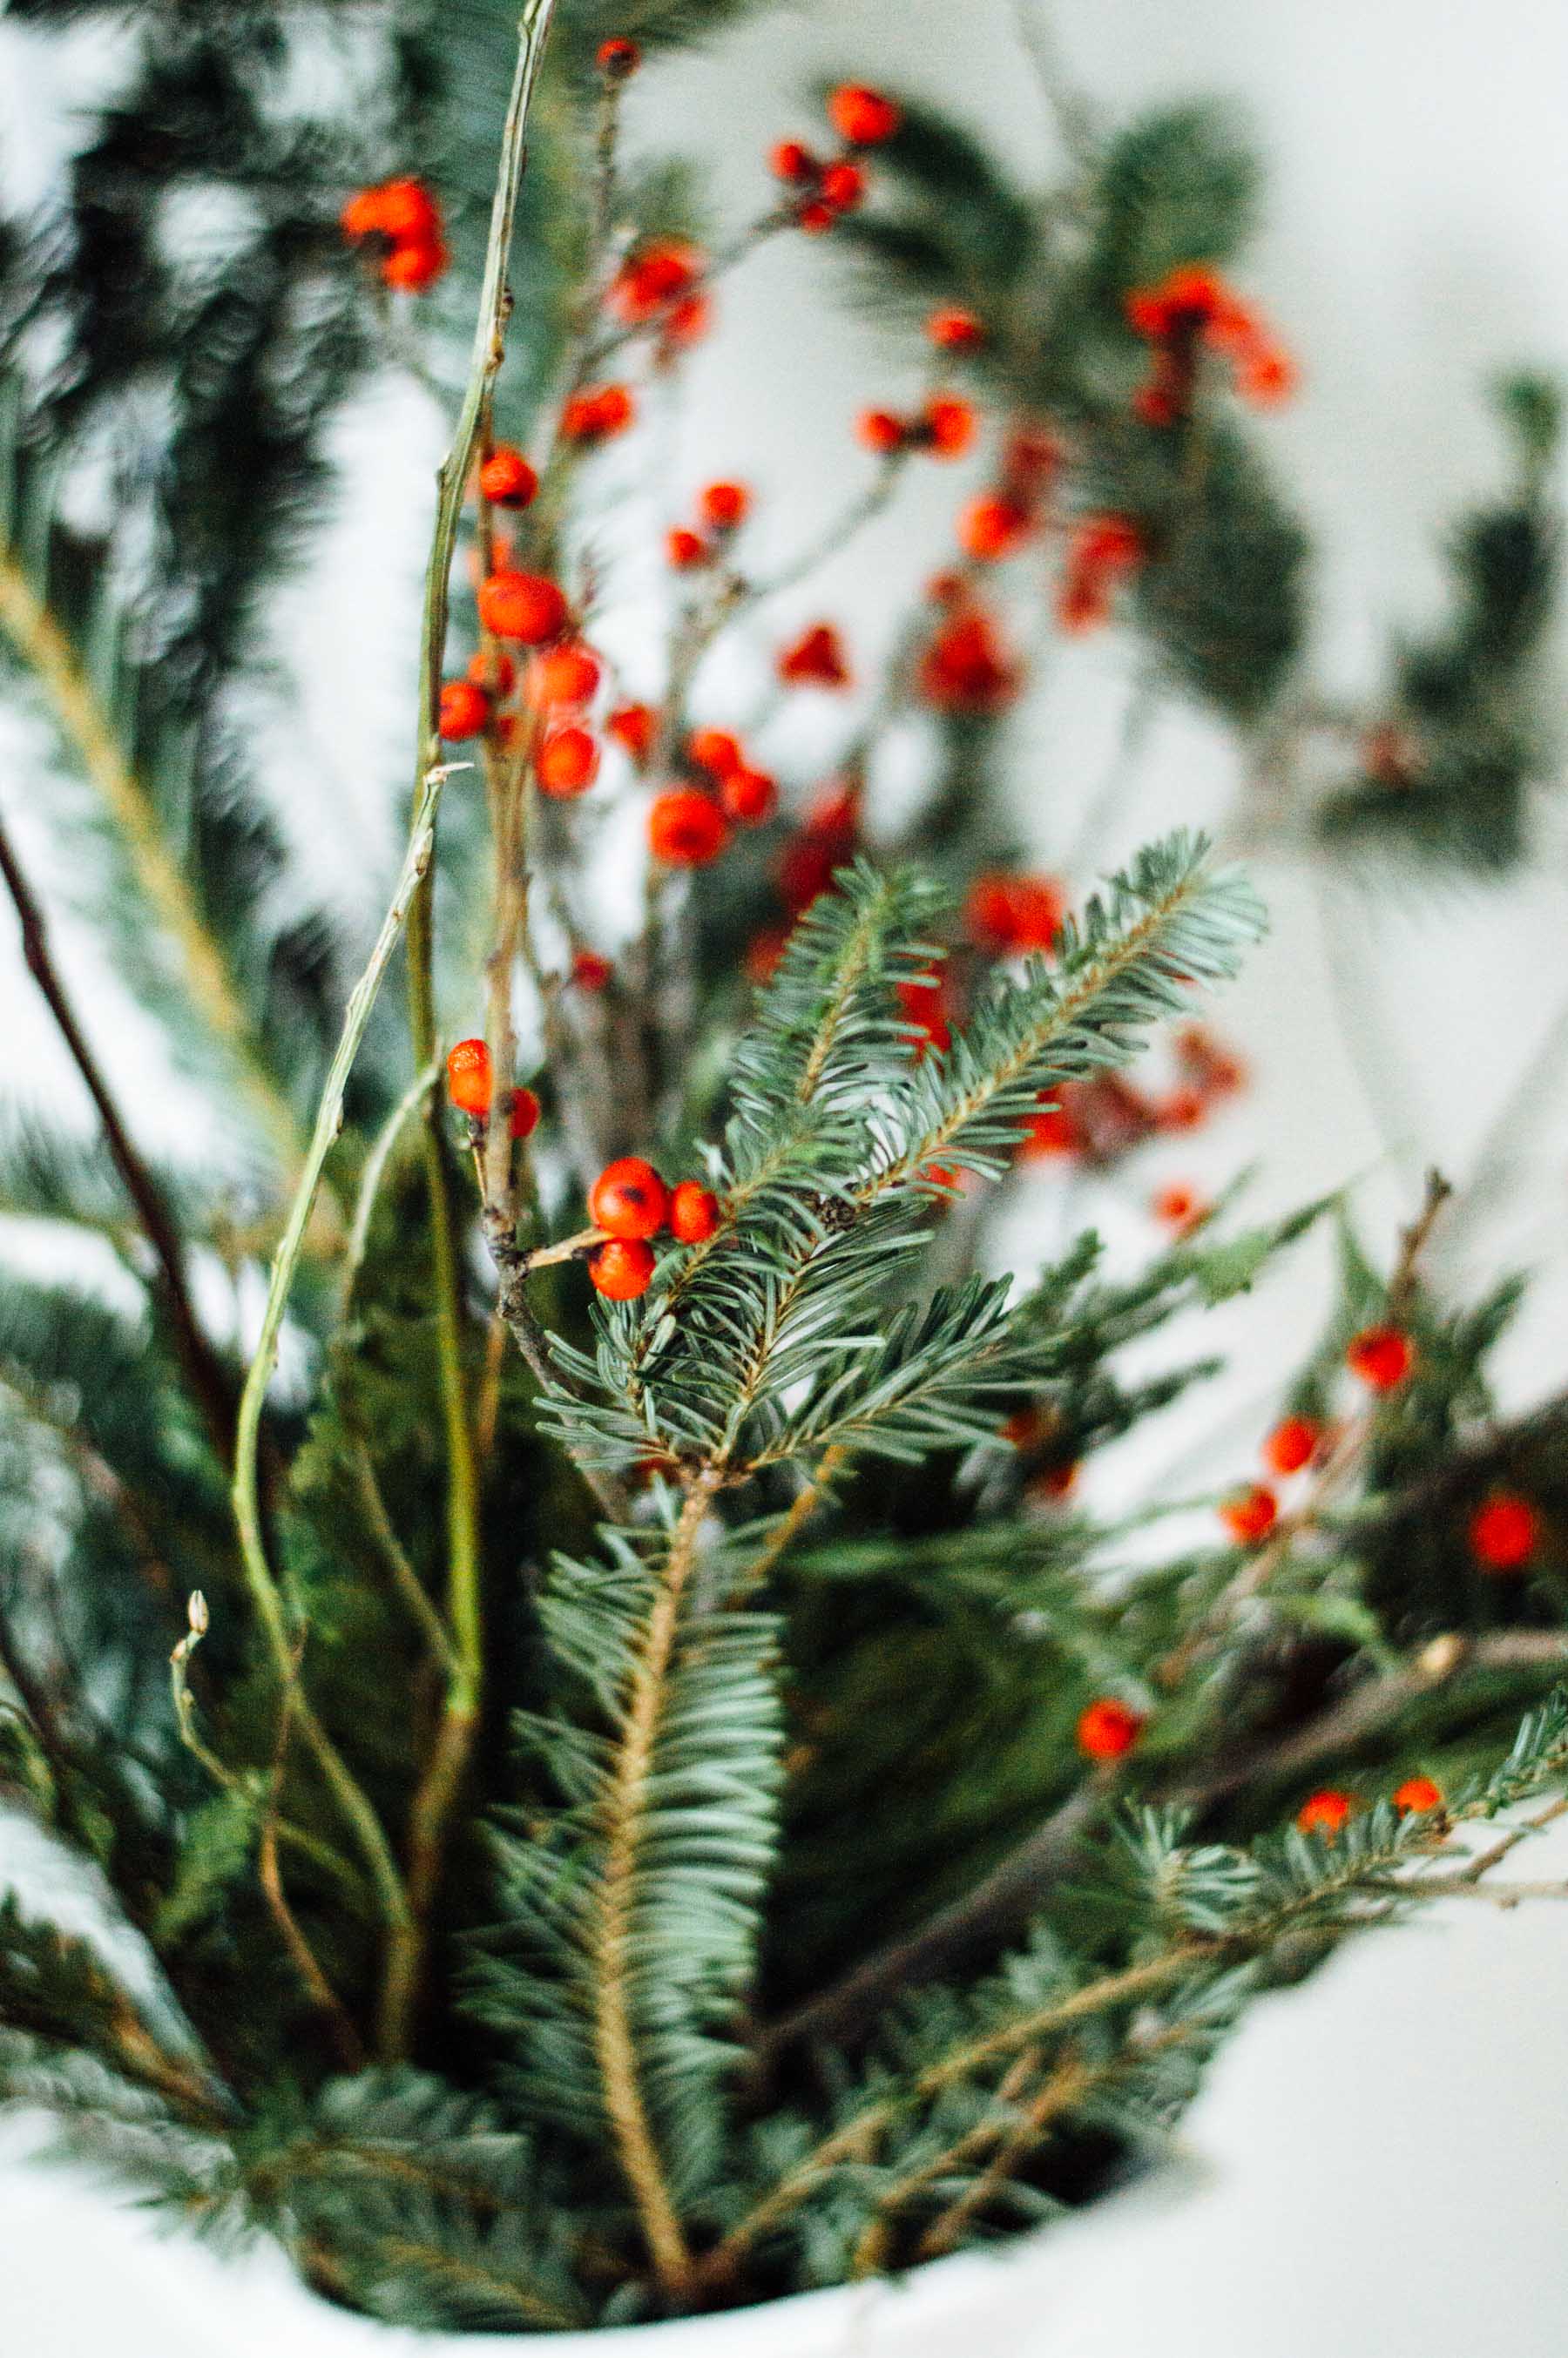 Quick and easy tips on hosting holiday houseguests this season | bygabriella.co